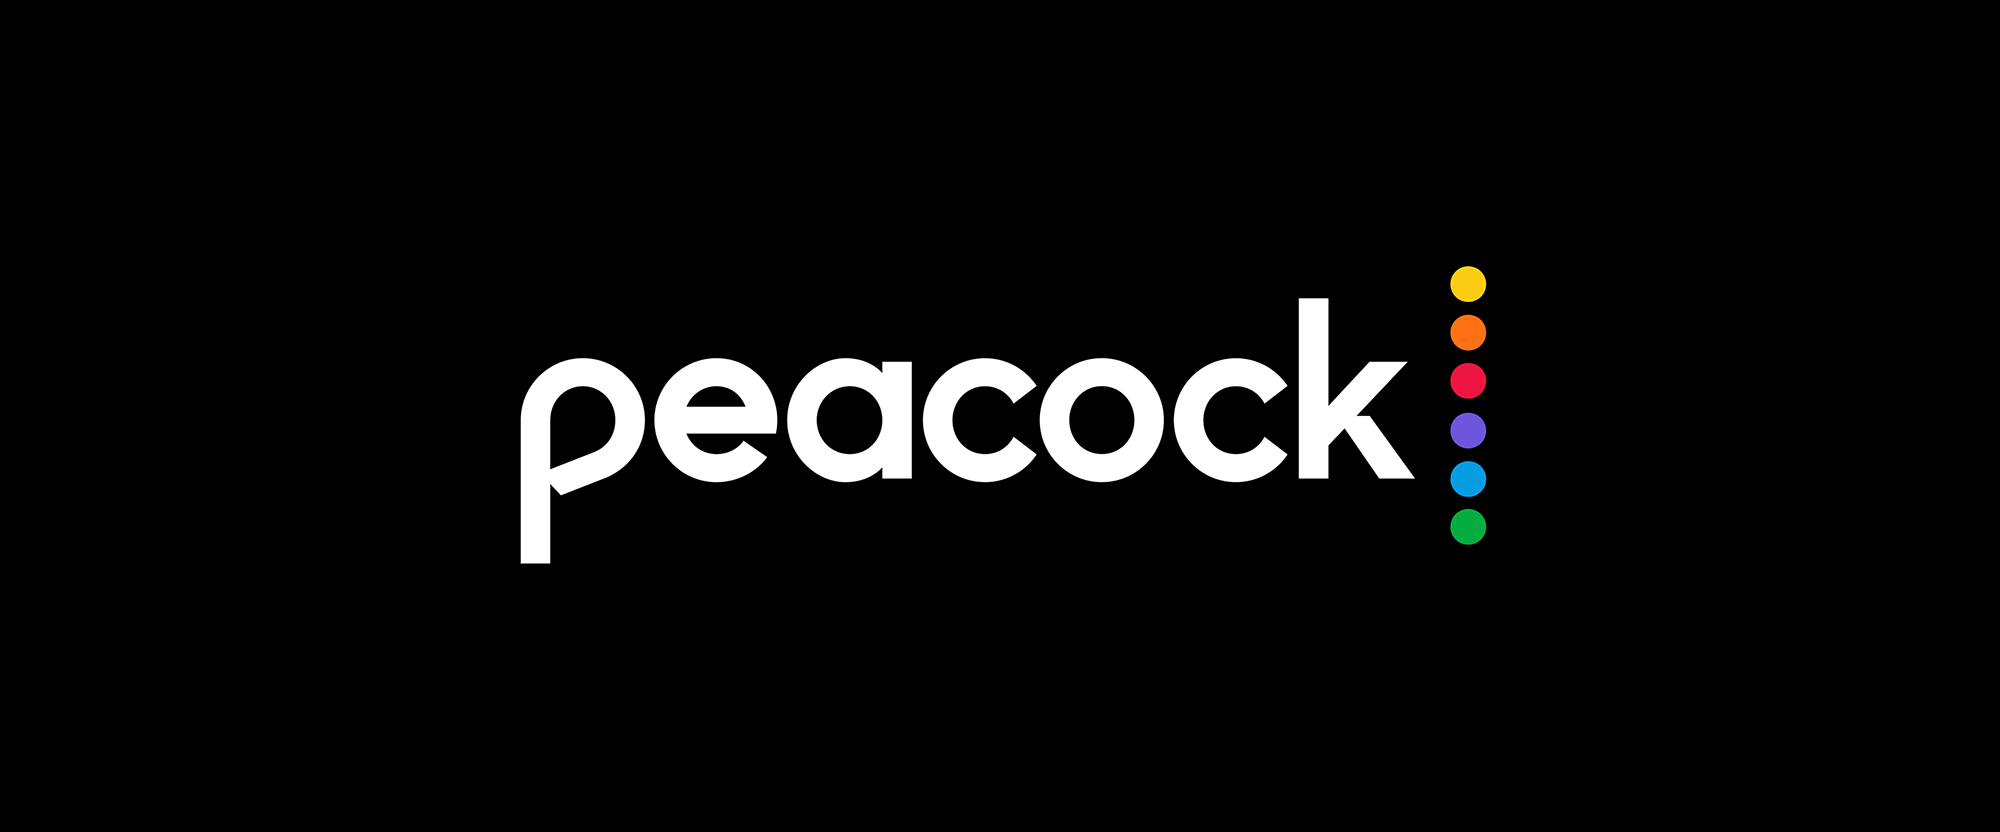 Brand New: New Name and Logo for Peacock